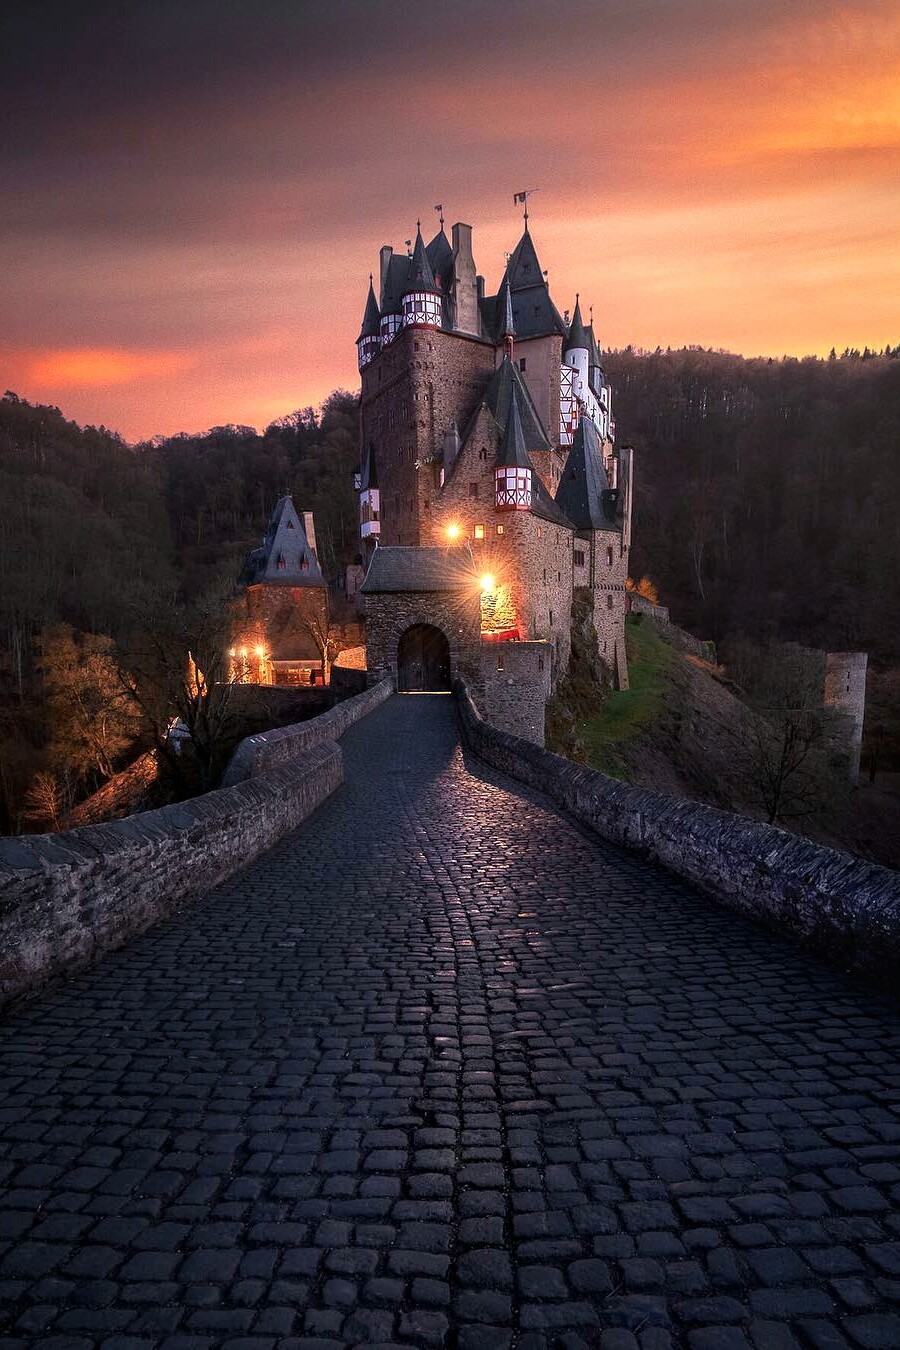 j-k-i-ng:
““ “Sunset at the Famous Burg Eltz“ by | Michael Sidofsky ” ”